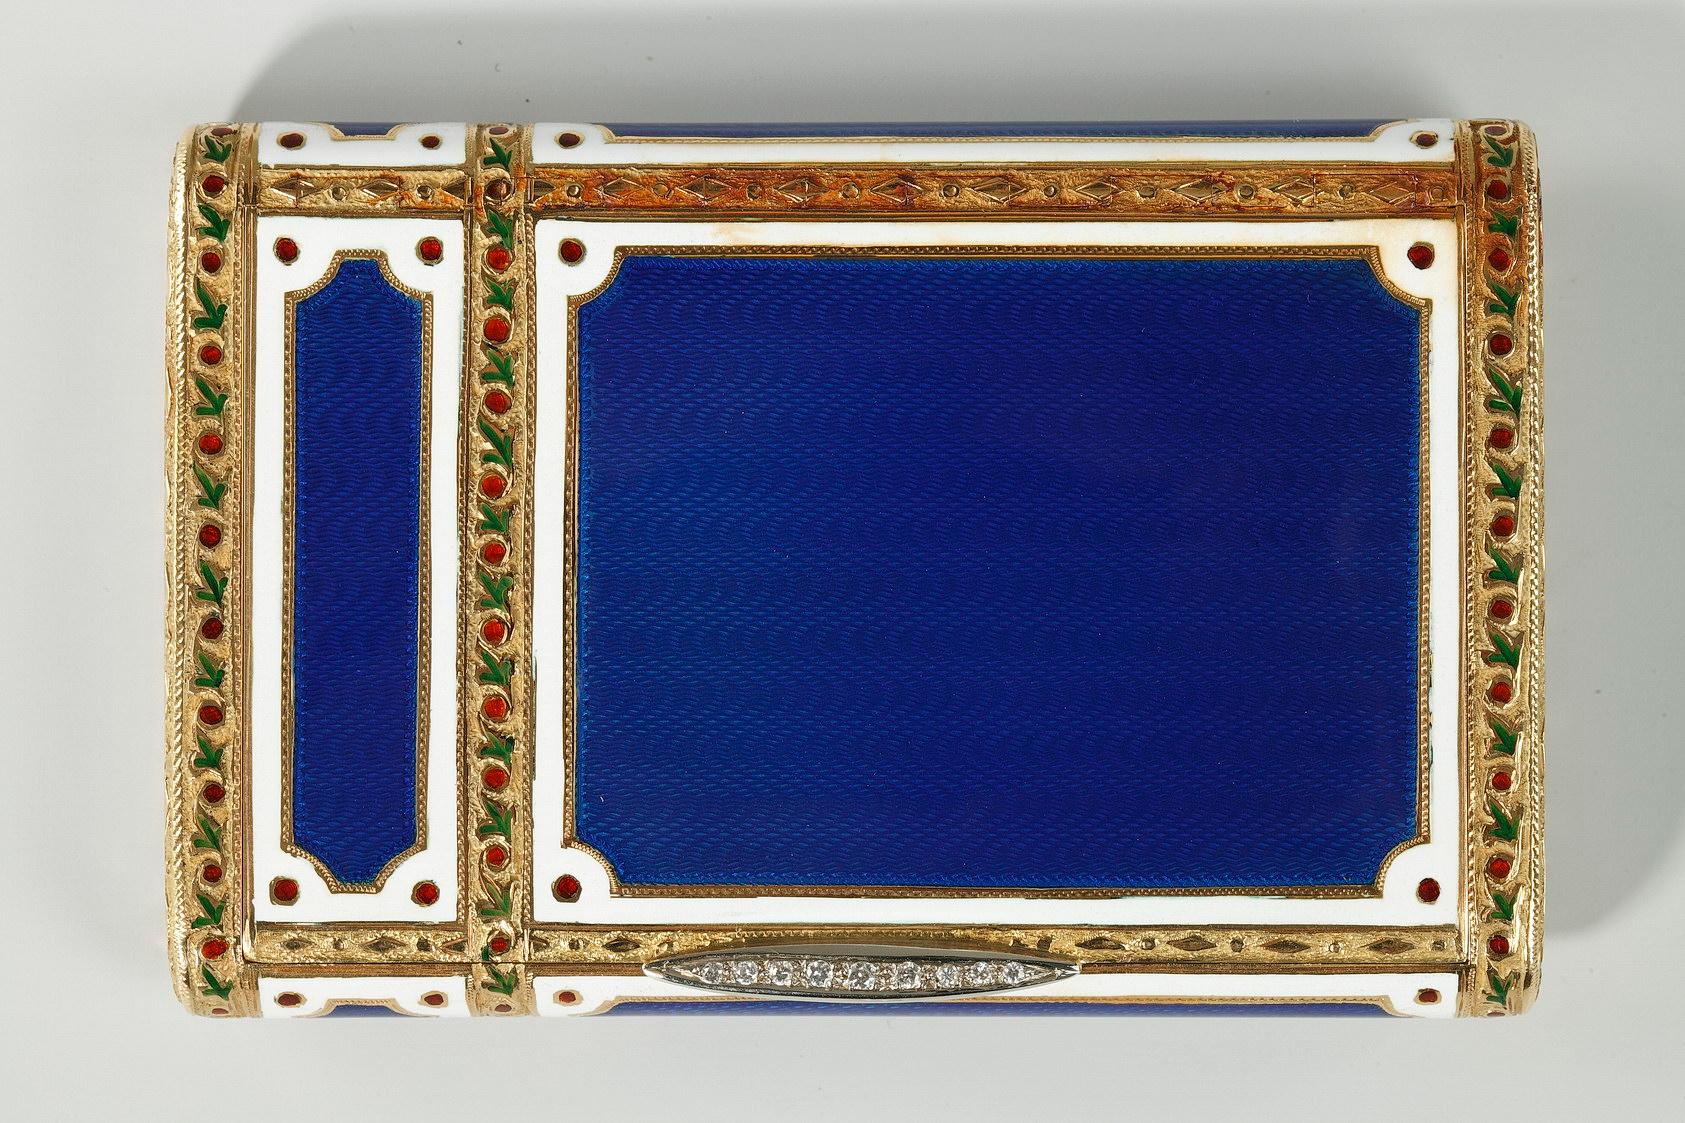 Large rectangular case in enameled gold. The panels of the case are embellished with translucent, royal blue enamel that reveals the intricate wave pattern in the gold underneath. Each panel is framed with a border of white enamel as well as a